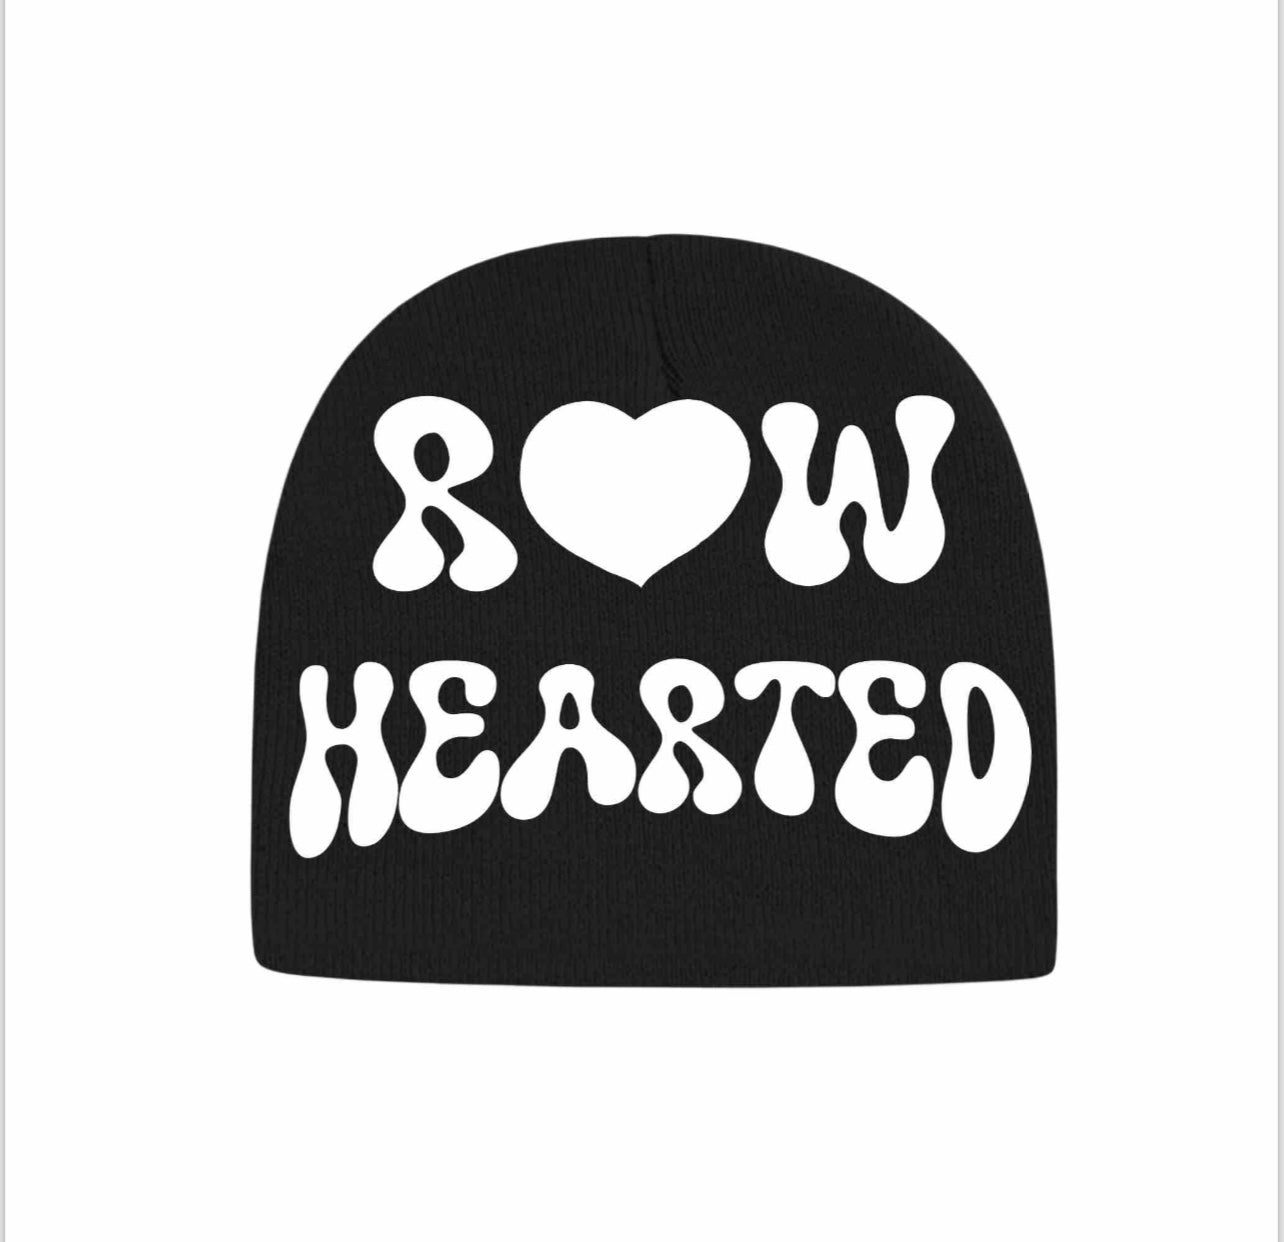 Raw Hearted Beanies